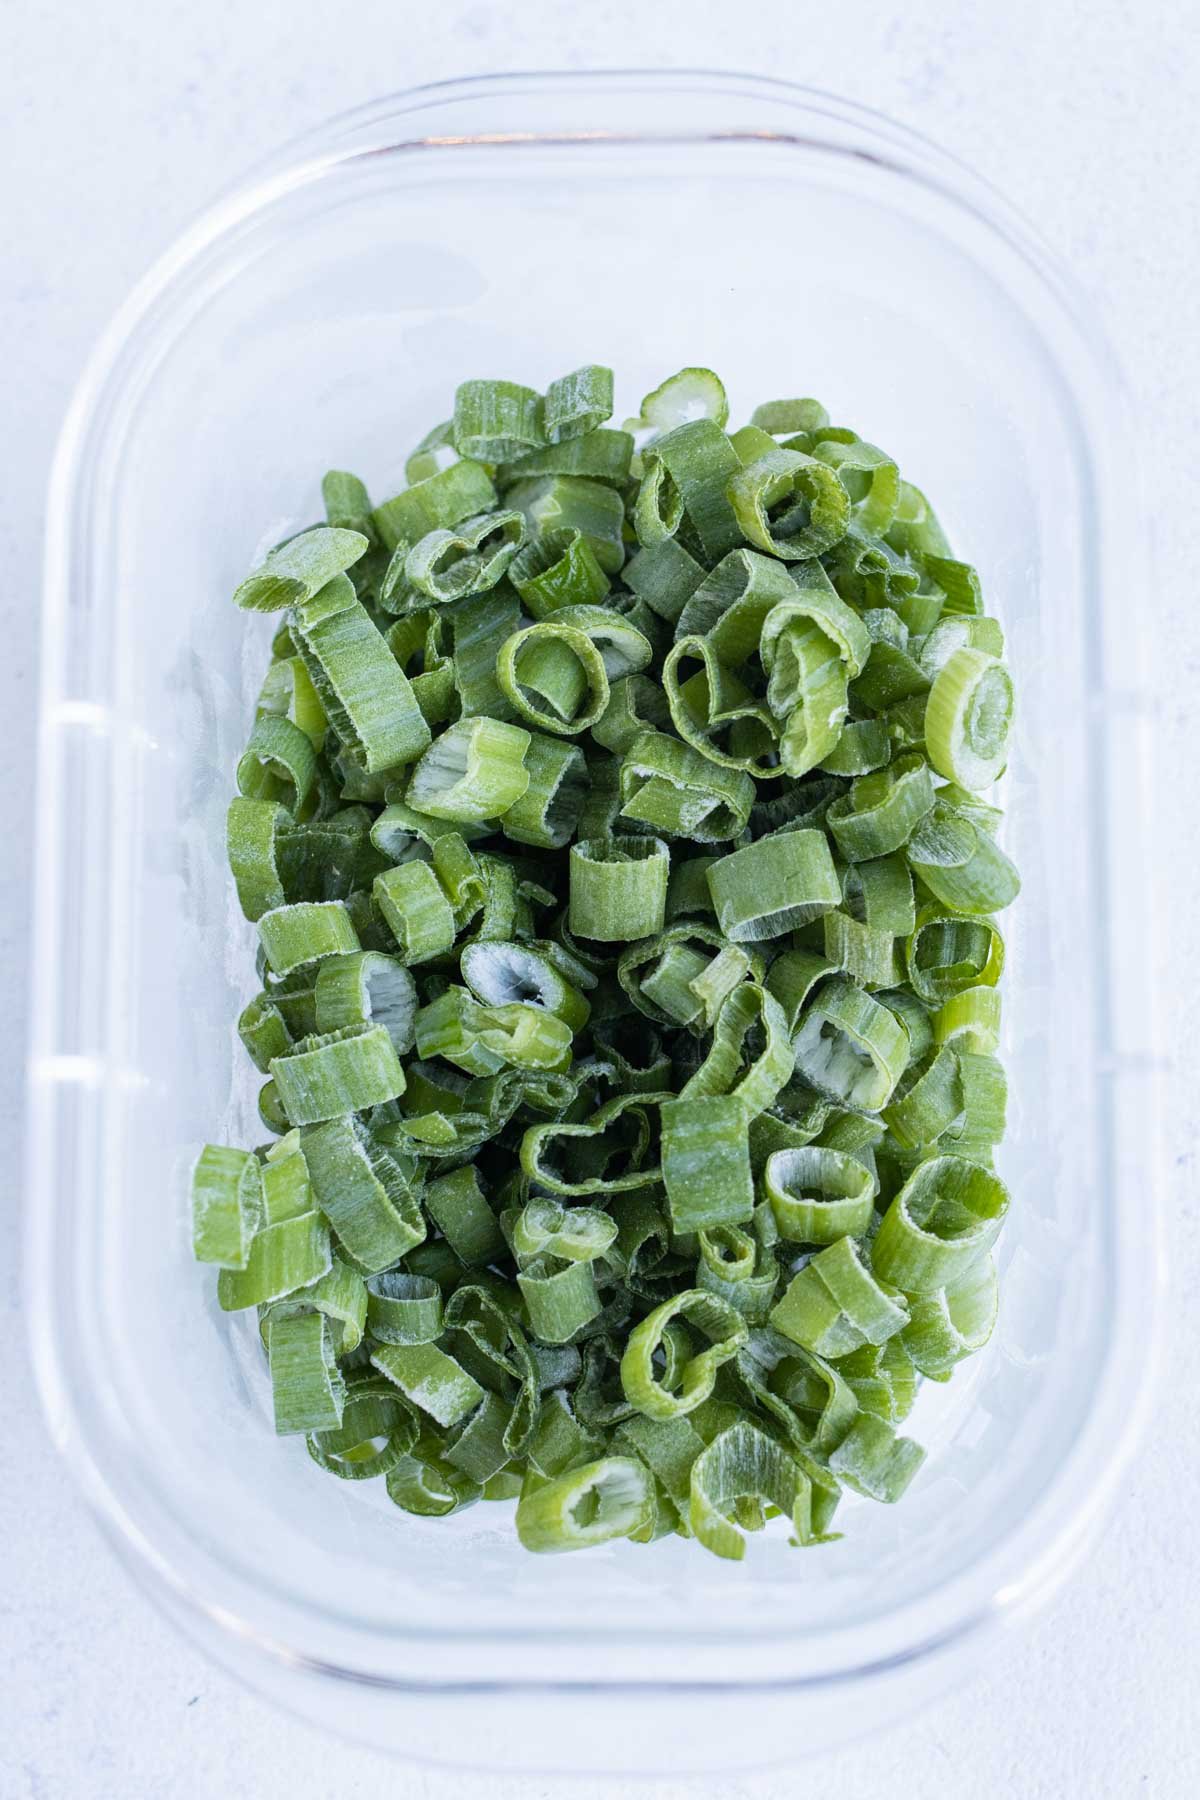 Frozen sliced green onions are stored in a container.